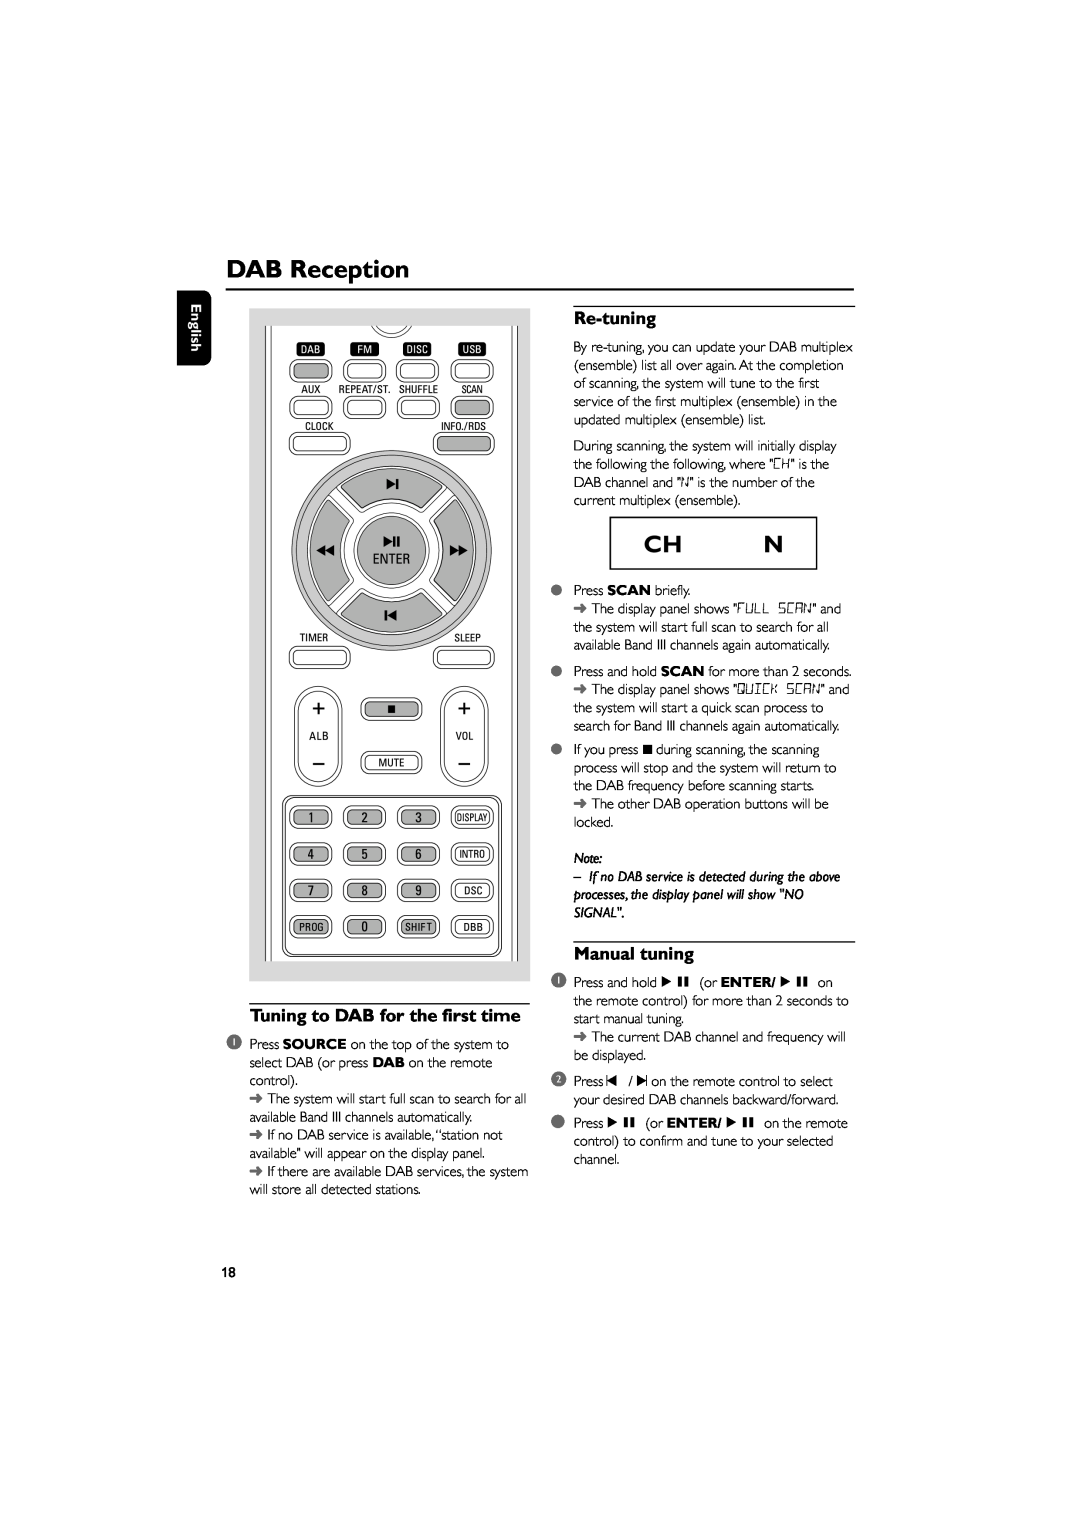 Philips PDCC-JW-0817 user manual DAB Reception, Ch N, Tuning to DAB for the first time, Re-tuning, Manual tuning, English 